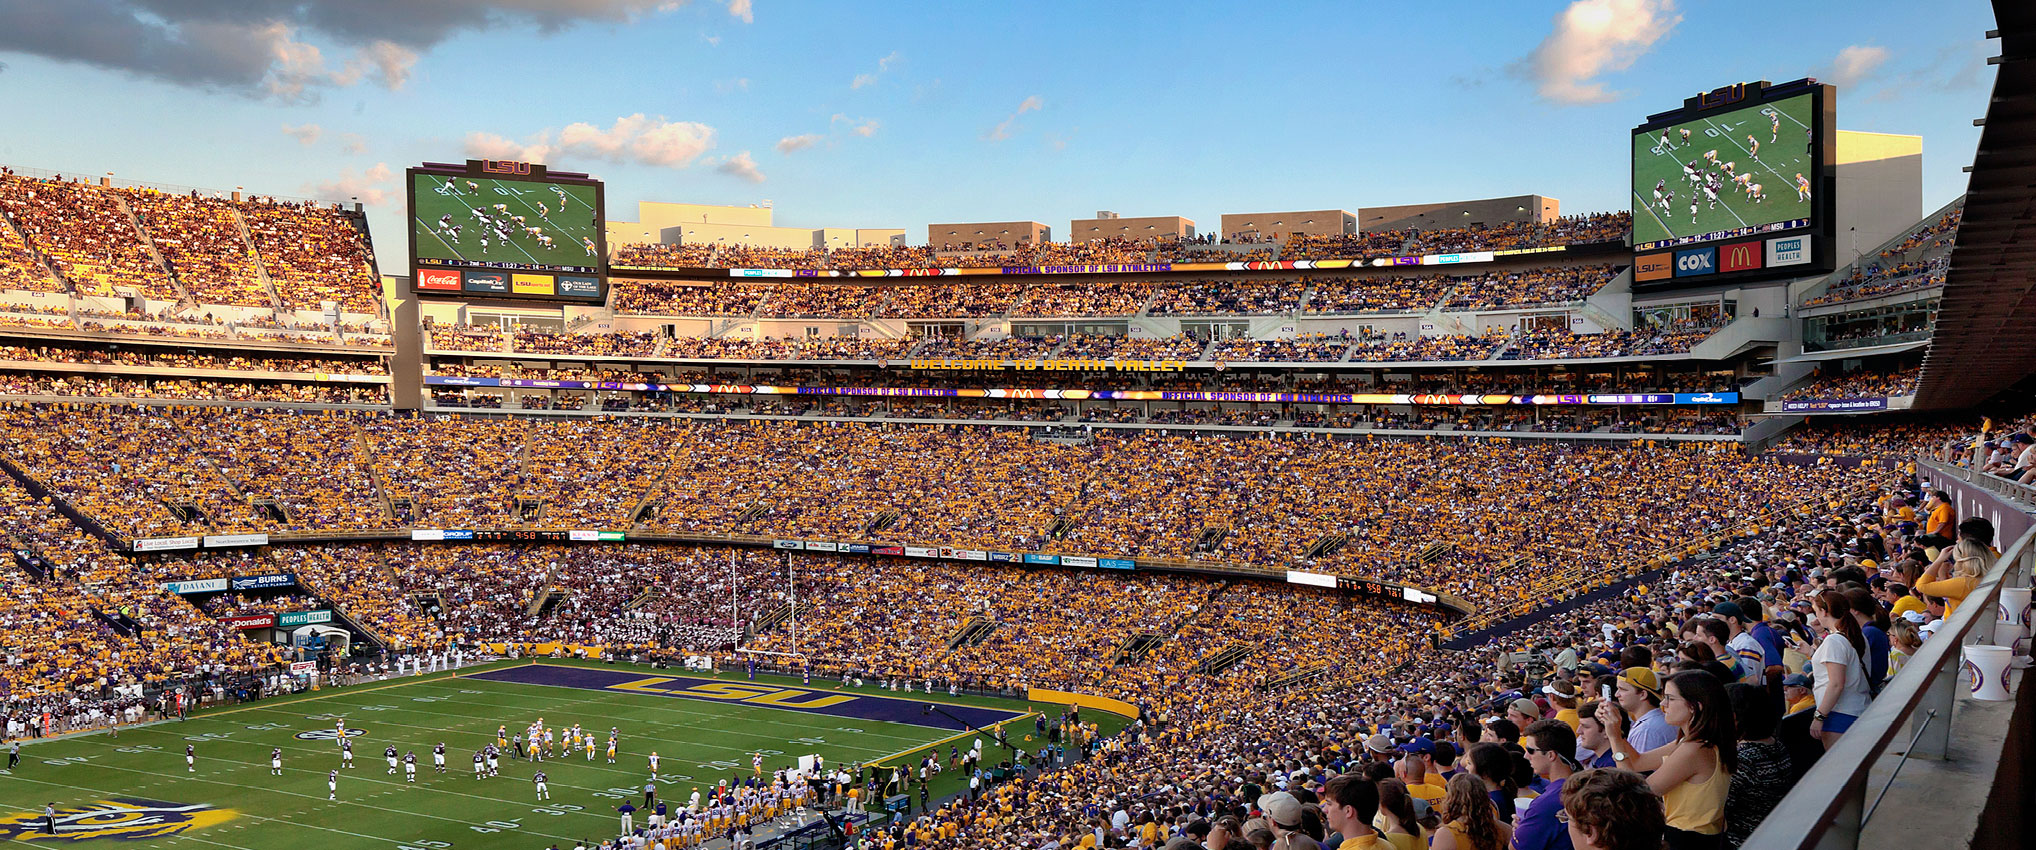 LSU Tiger Stadium South End Zone Expansion Designed by HKS, Increases Venue’s Capacity to Nearly 100,000